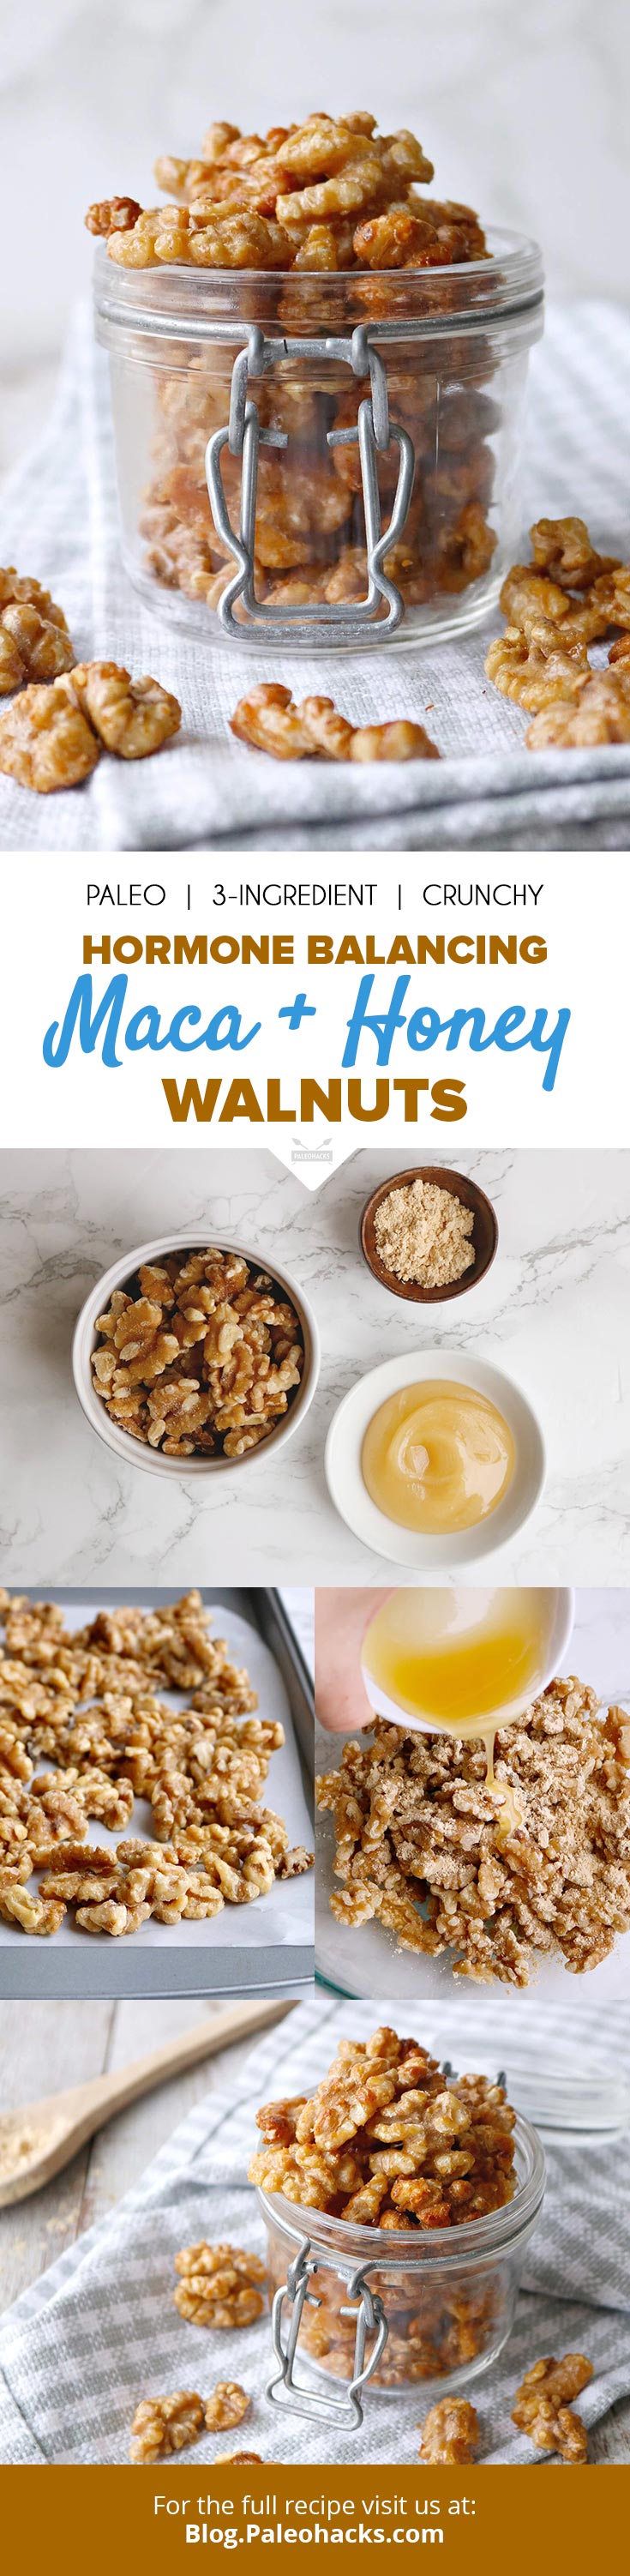 Satisfy a snack craving with these sweet, 3-ingredient honey roasted maca walnuts! This recipe is easy to make in large batches ahead of time.